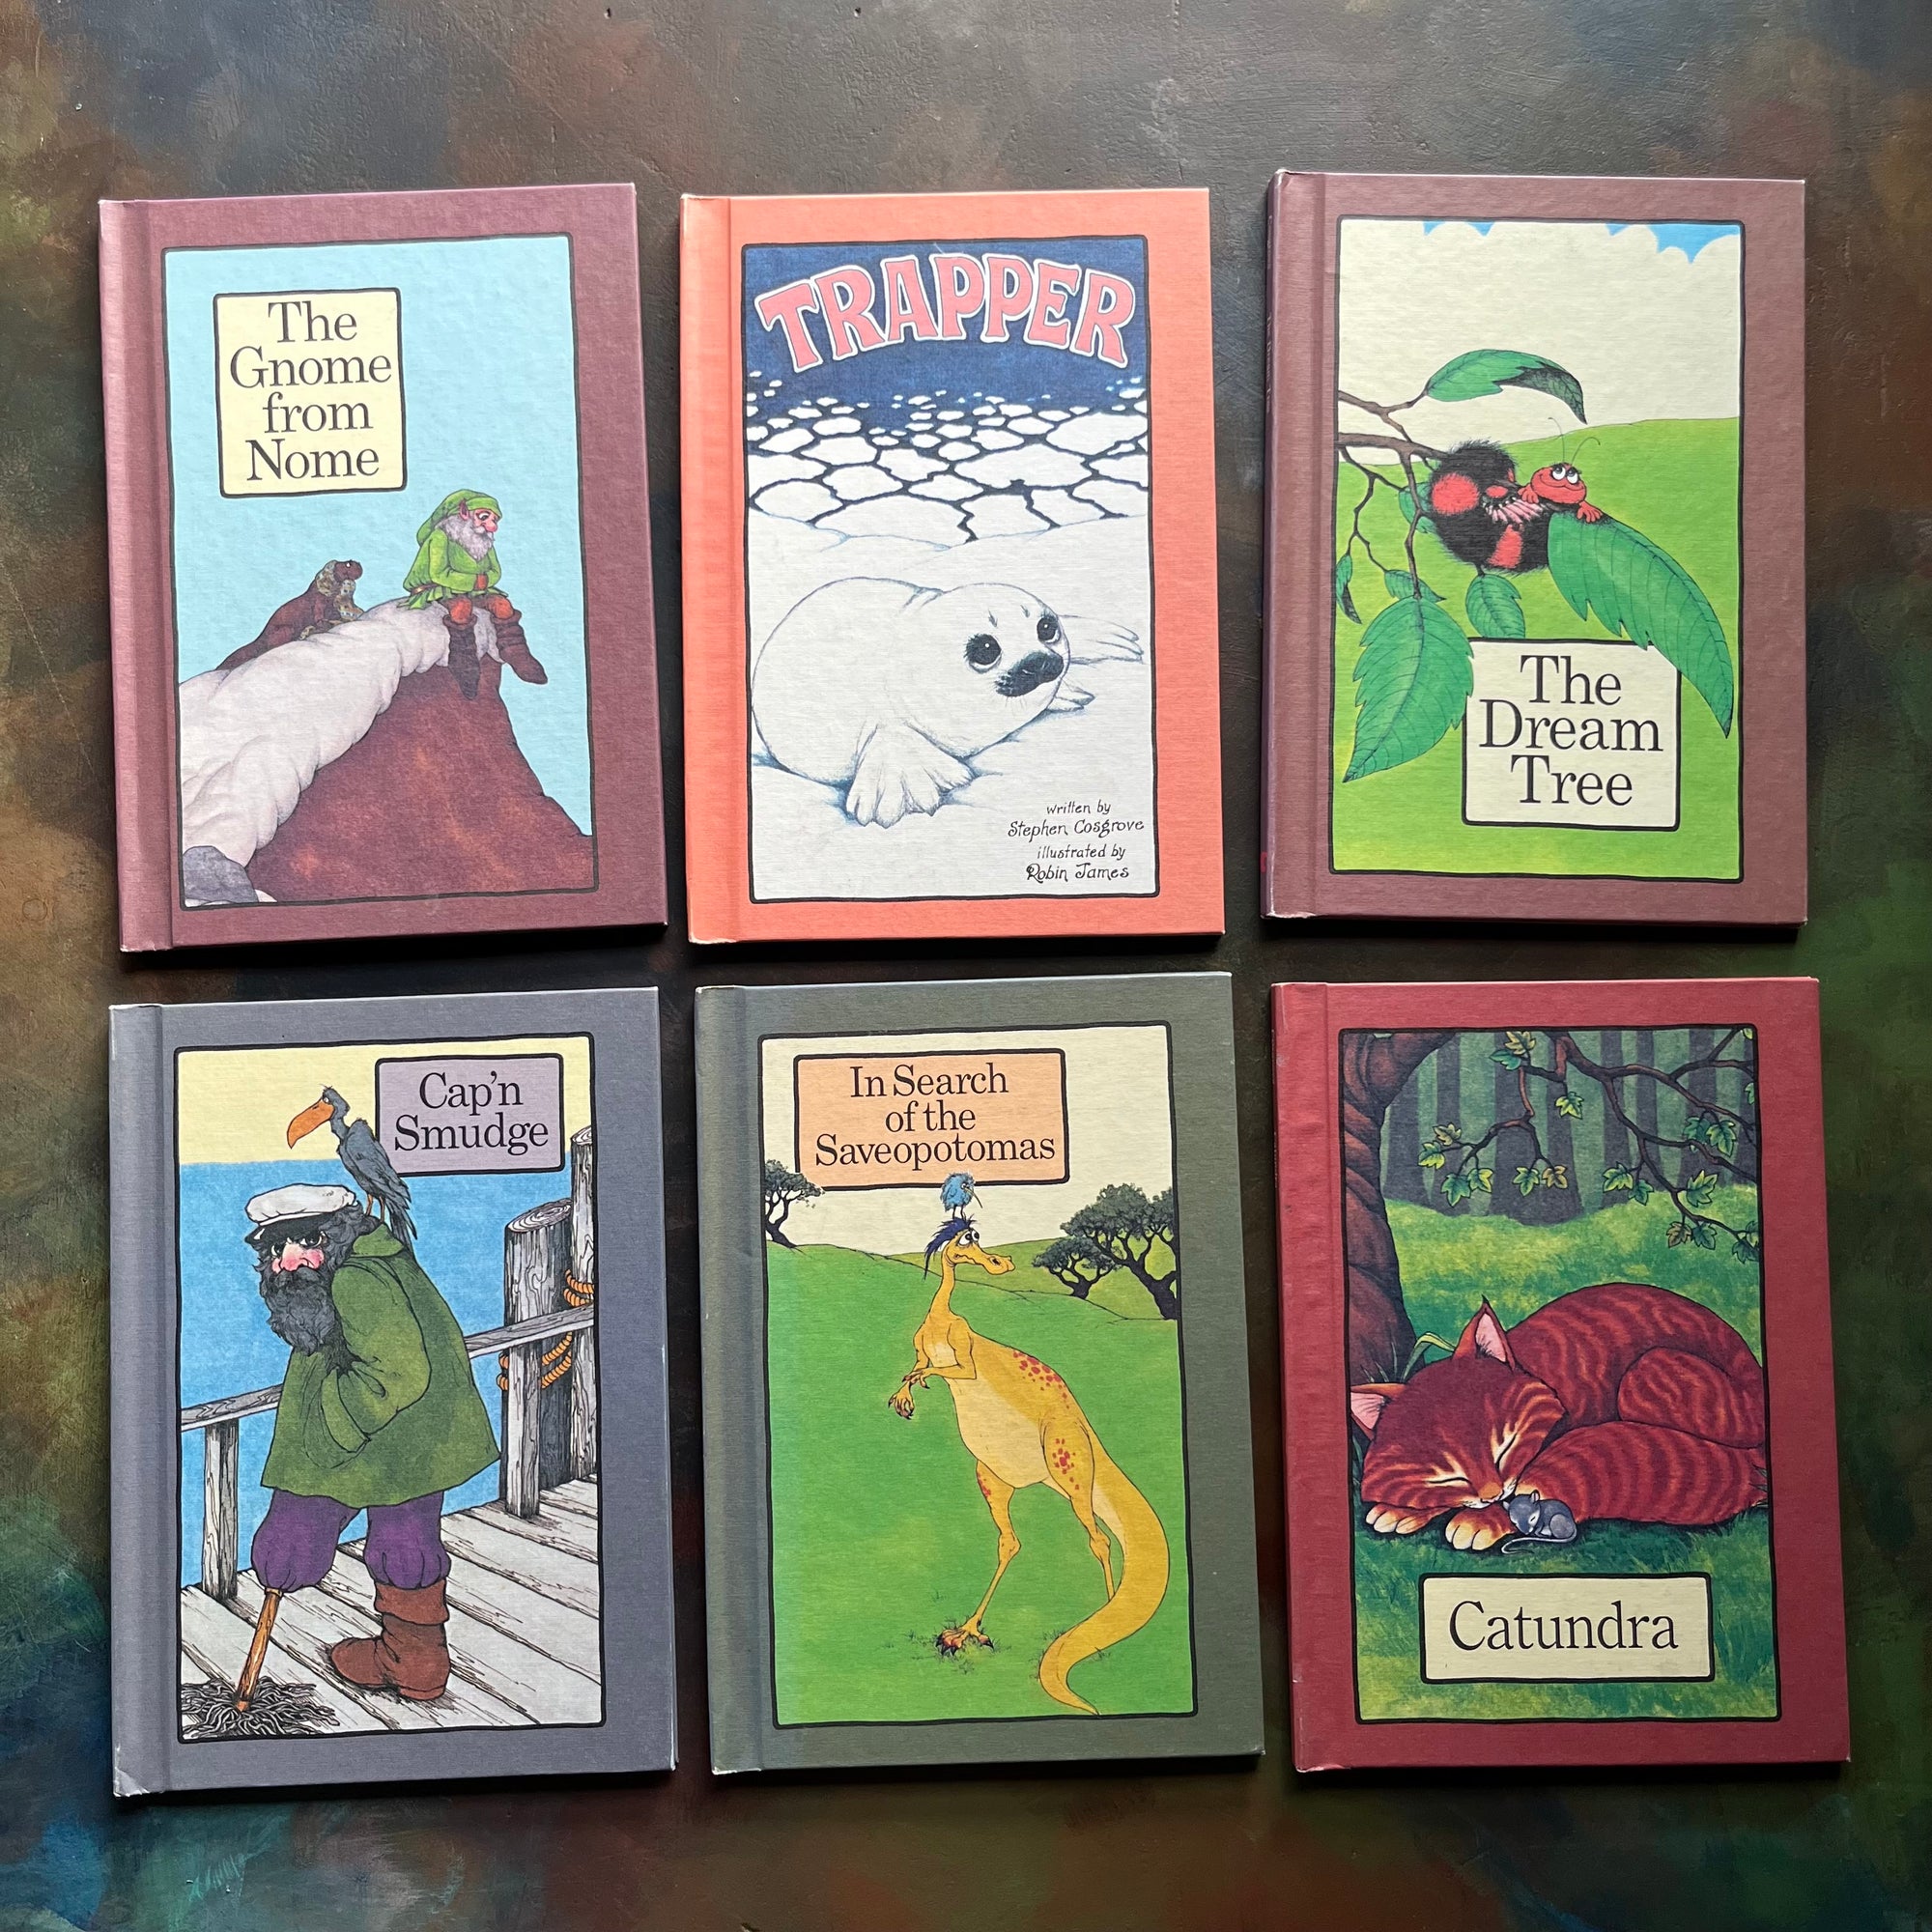 A Serendipity Book Set of Six Written by Stephen Cosgrove with Illustrations by Robin James-vintage children's picture books for Weekly Reader Books-view of the front covers